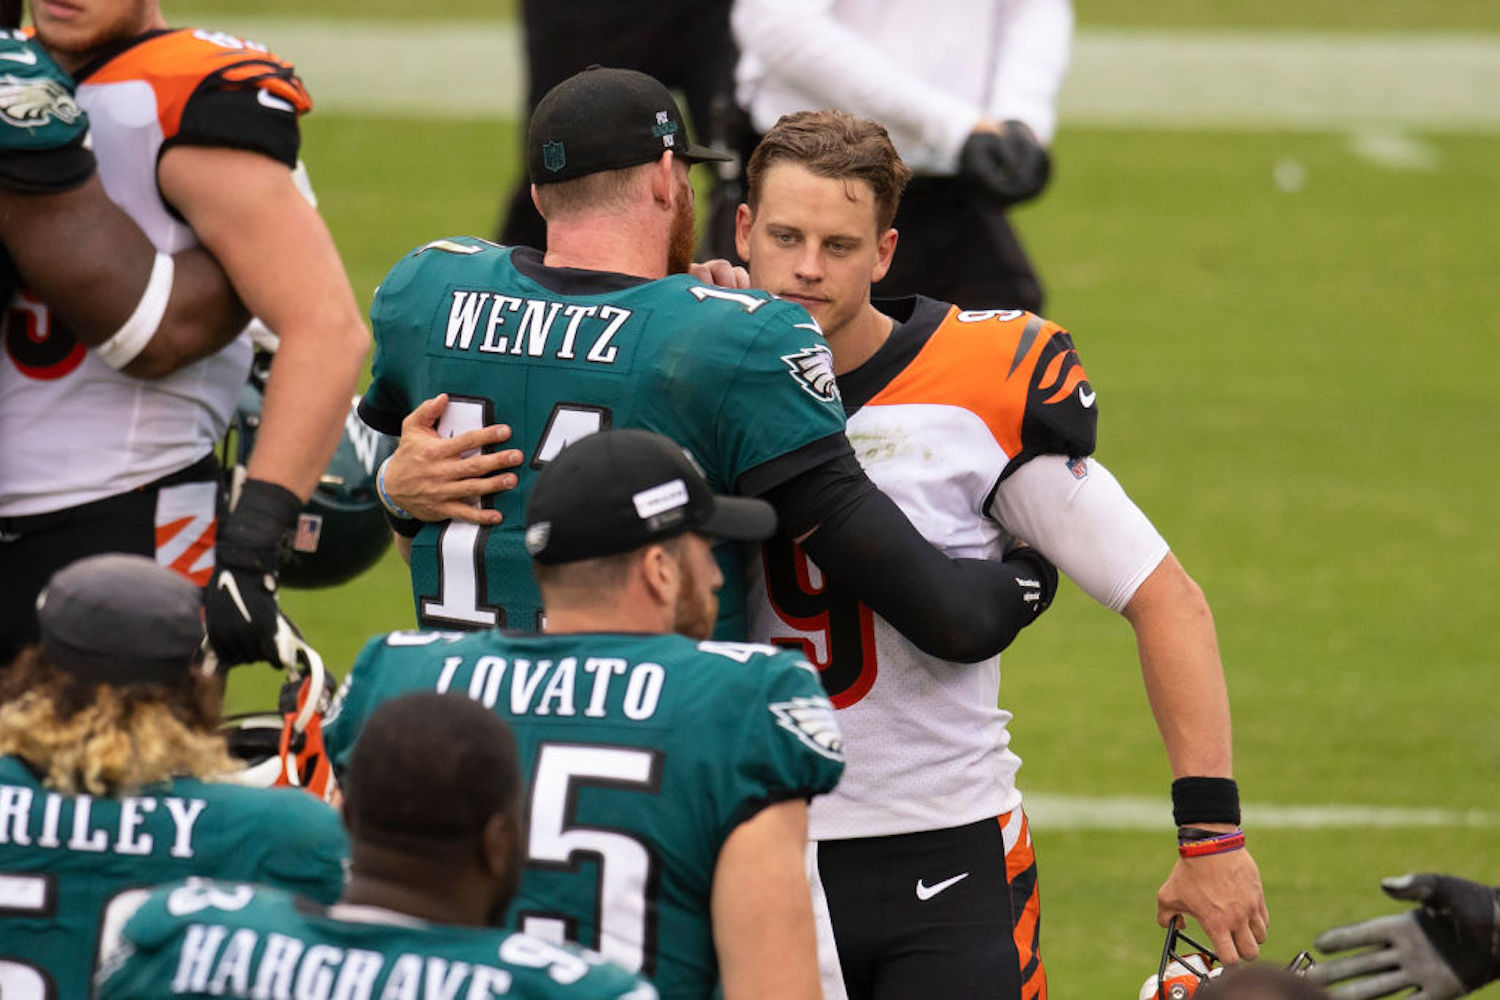 Most NFL were shocked to see the Eagles and Bengals tie in embarrassing fashion, but one NFL writer almost nailed the final score exactly.